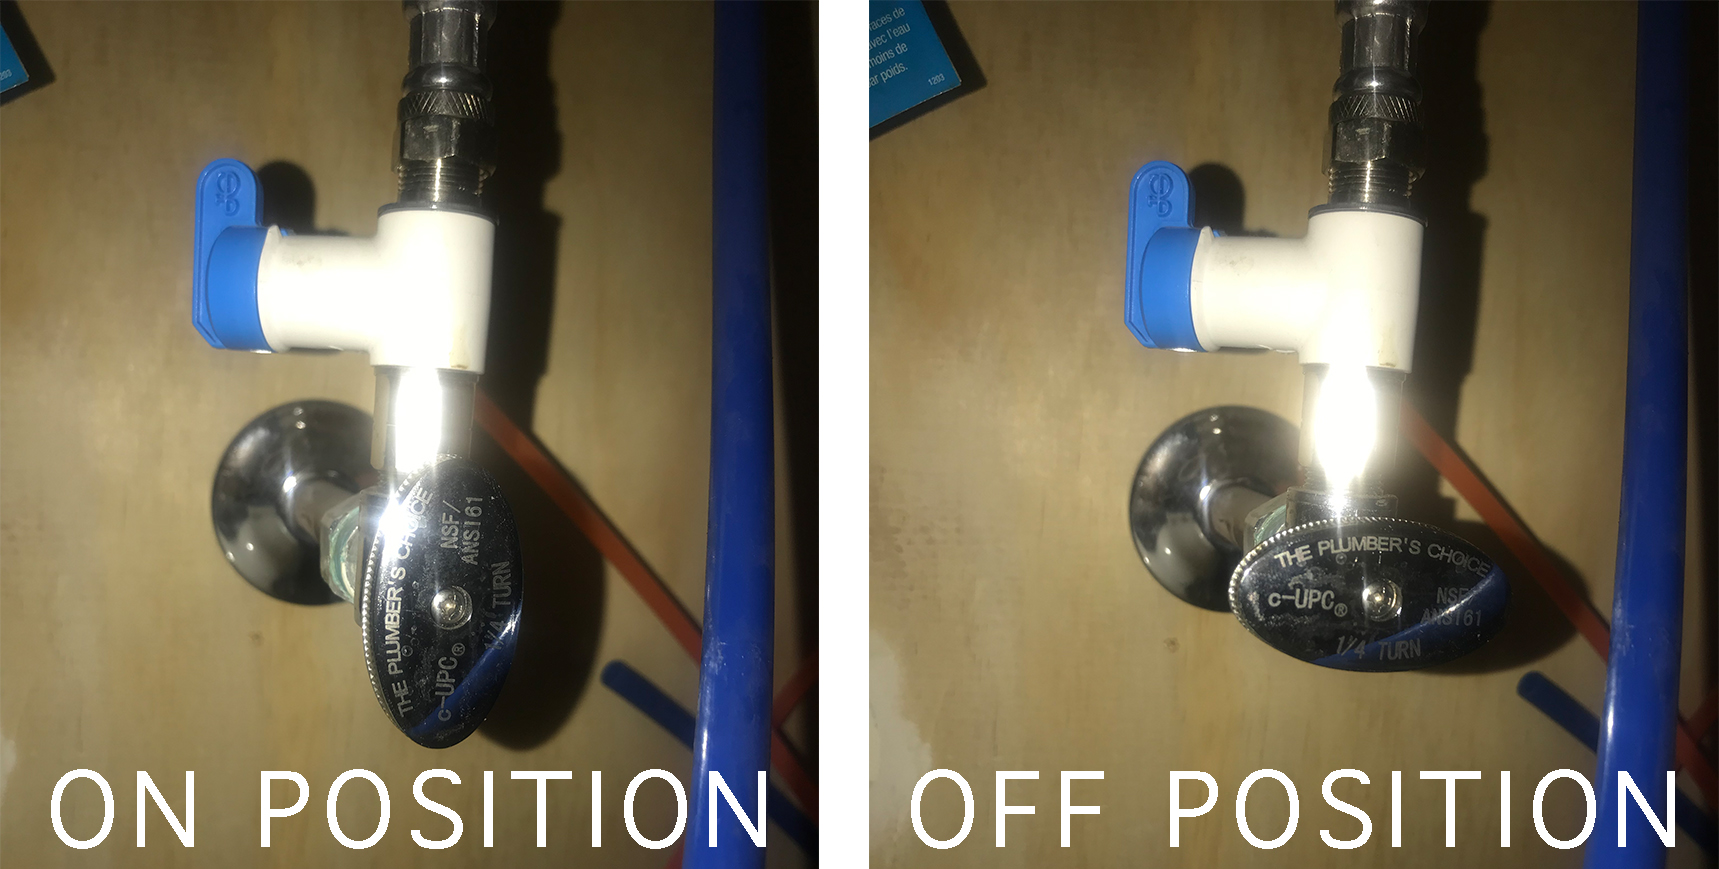 How to use emergency shut-off valve. 